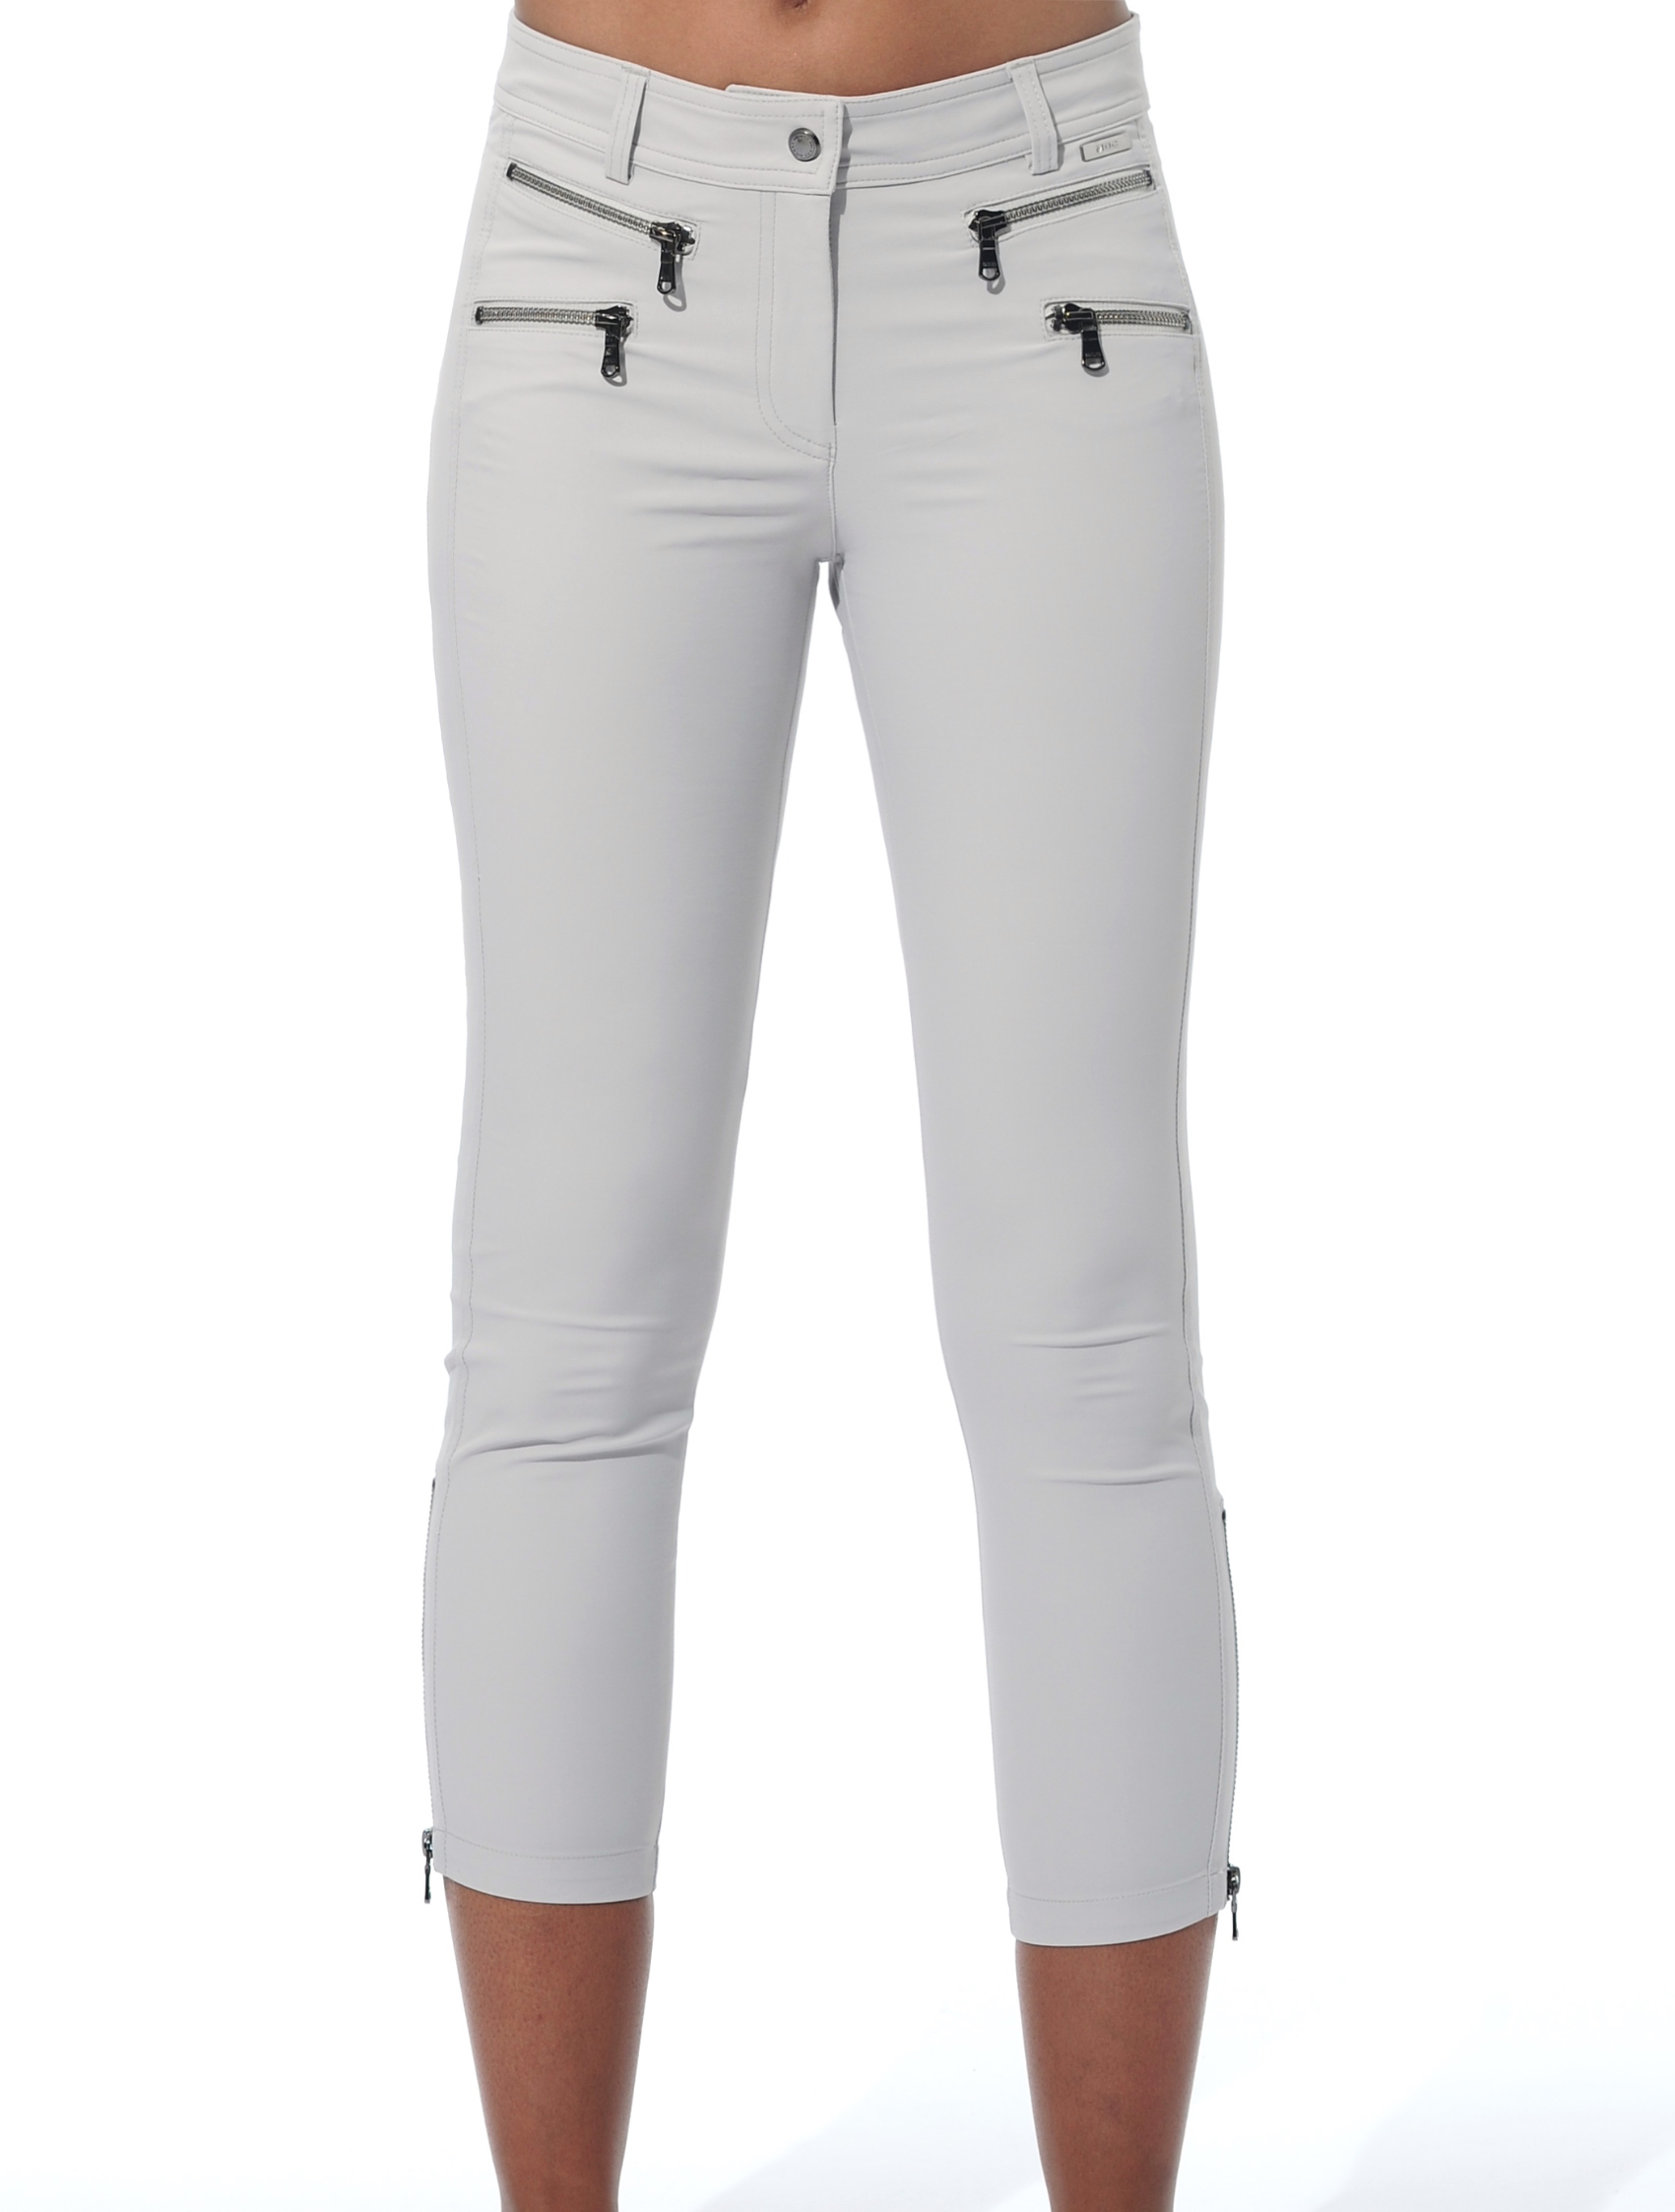 4way stretch double zip cropped pants silver 